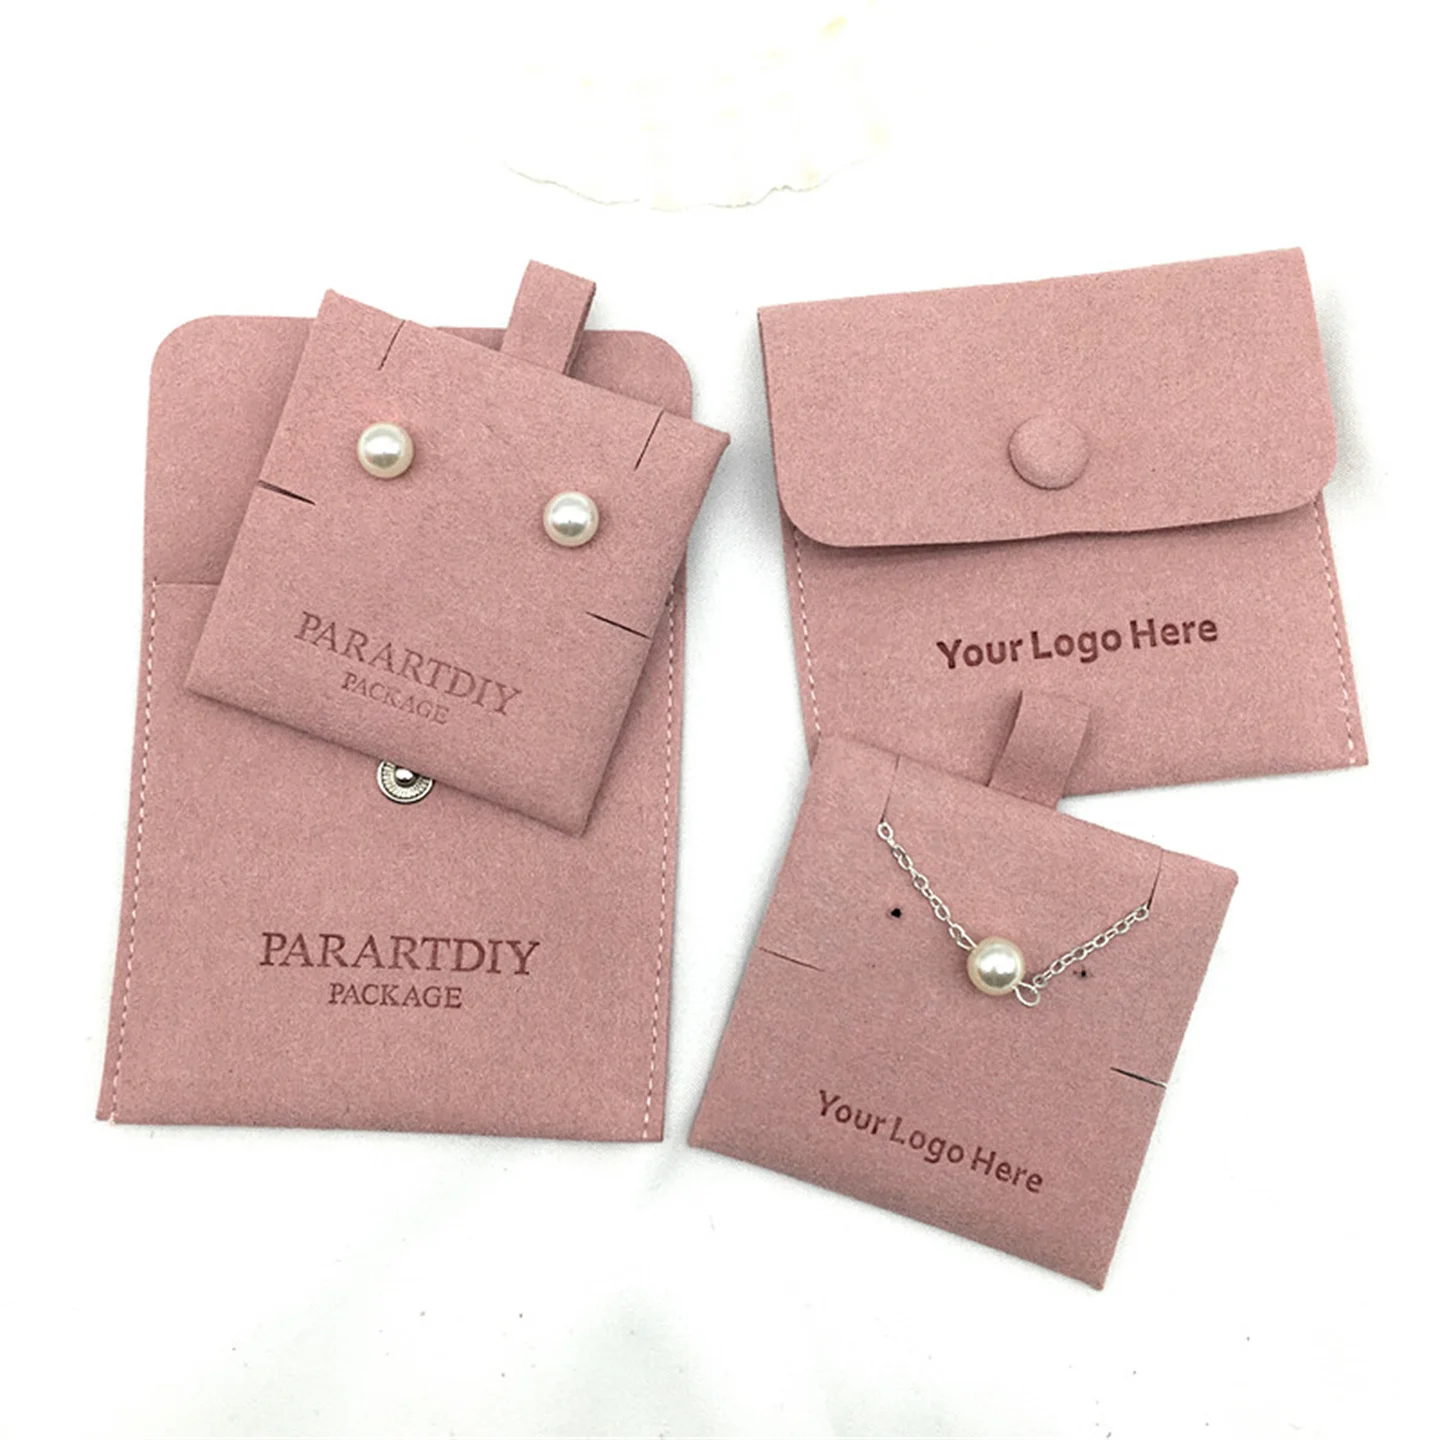 20/50/200/500 sets of pink jewelry bag, microfiber bag, personalized with insert card, earrings, necklace bag, customized logo